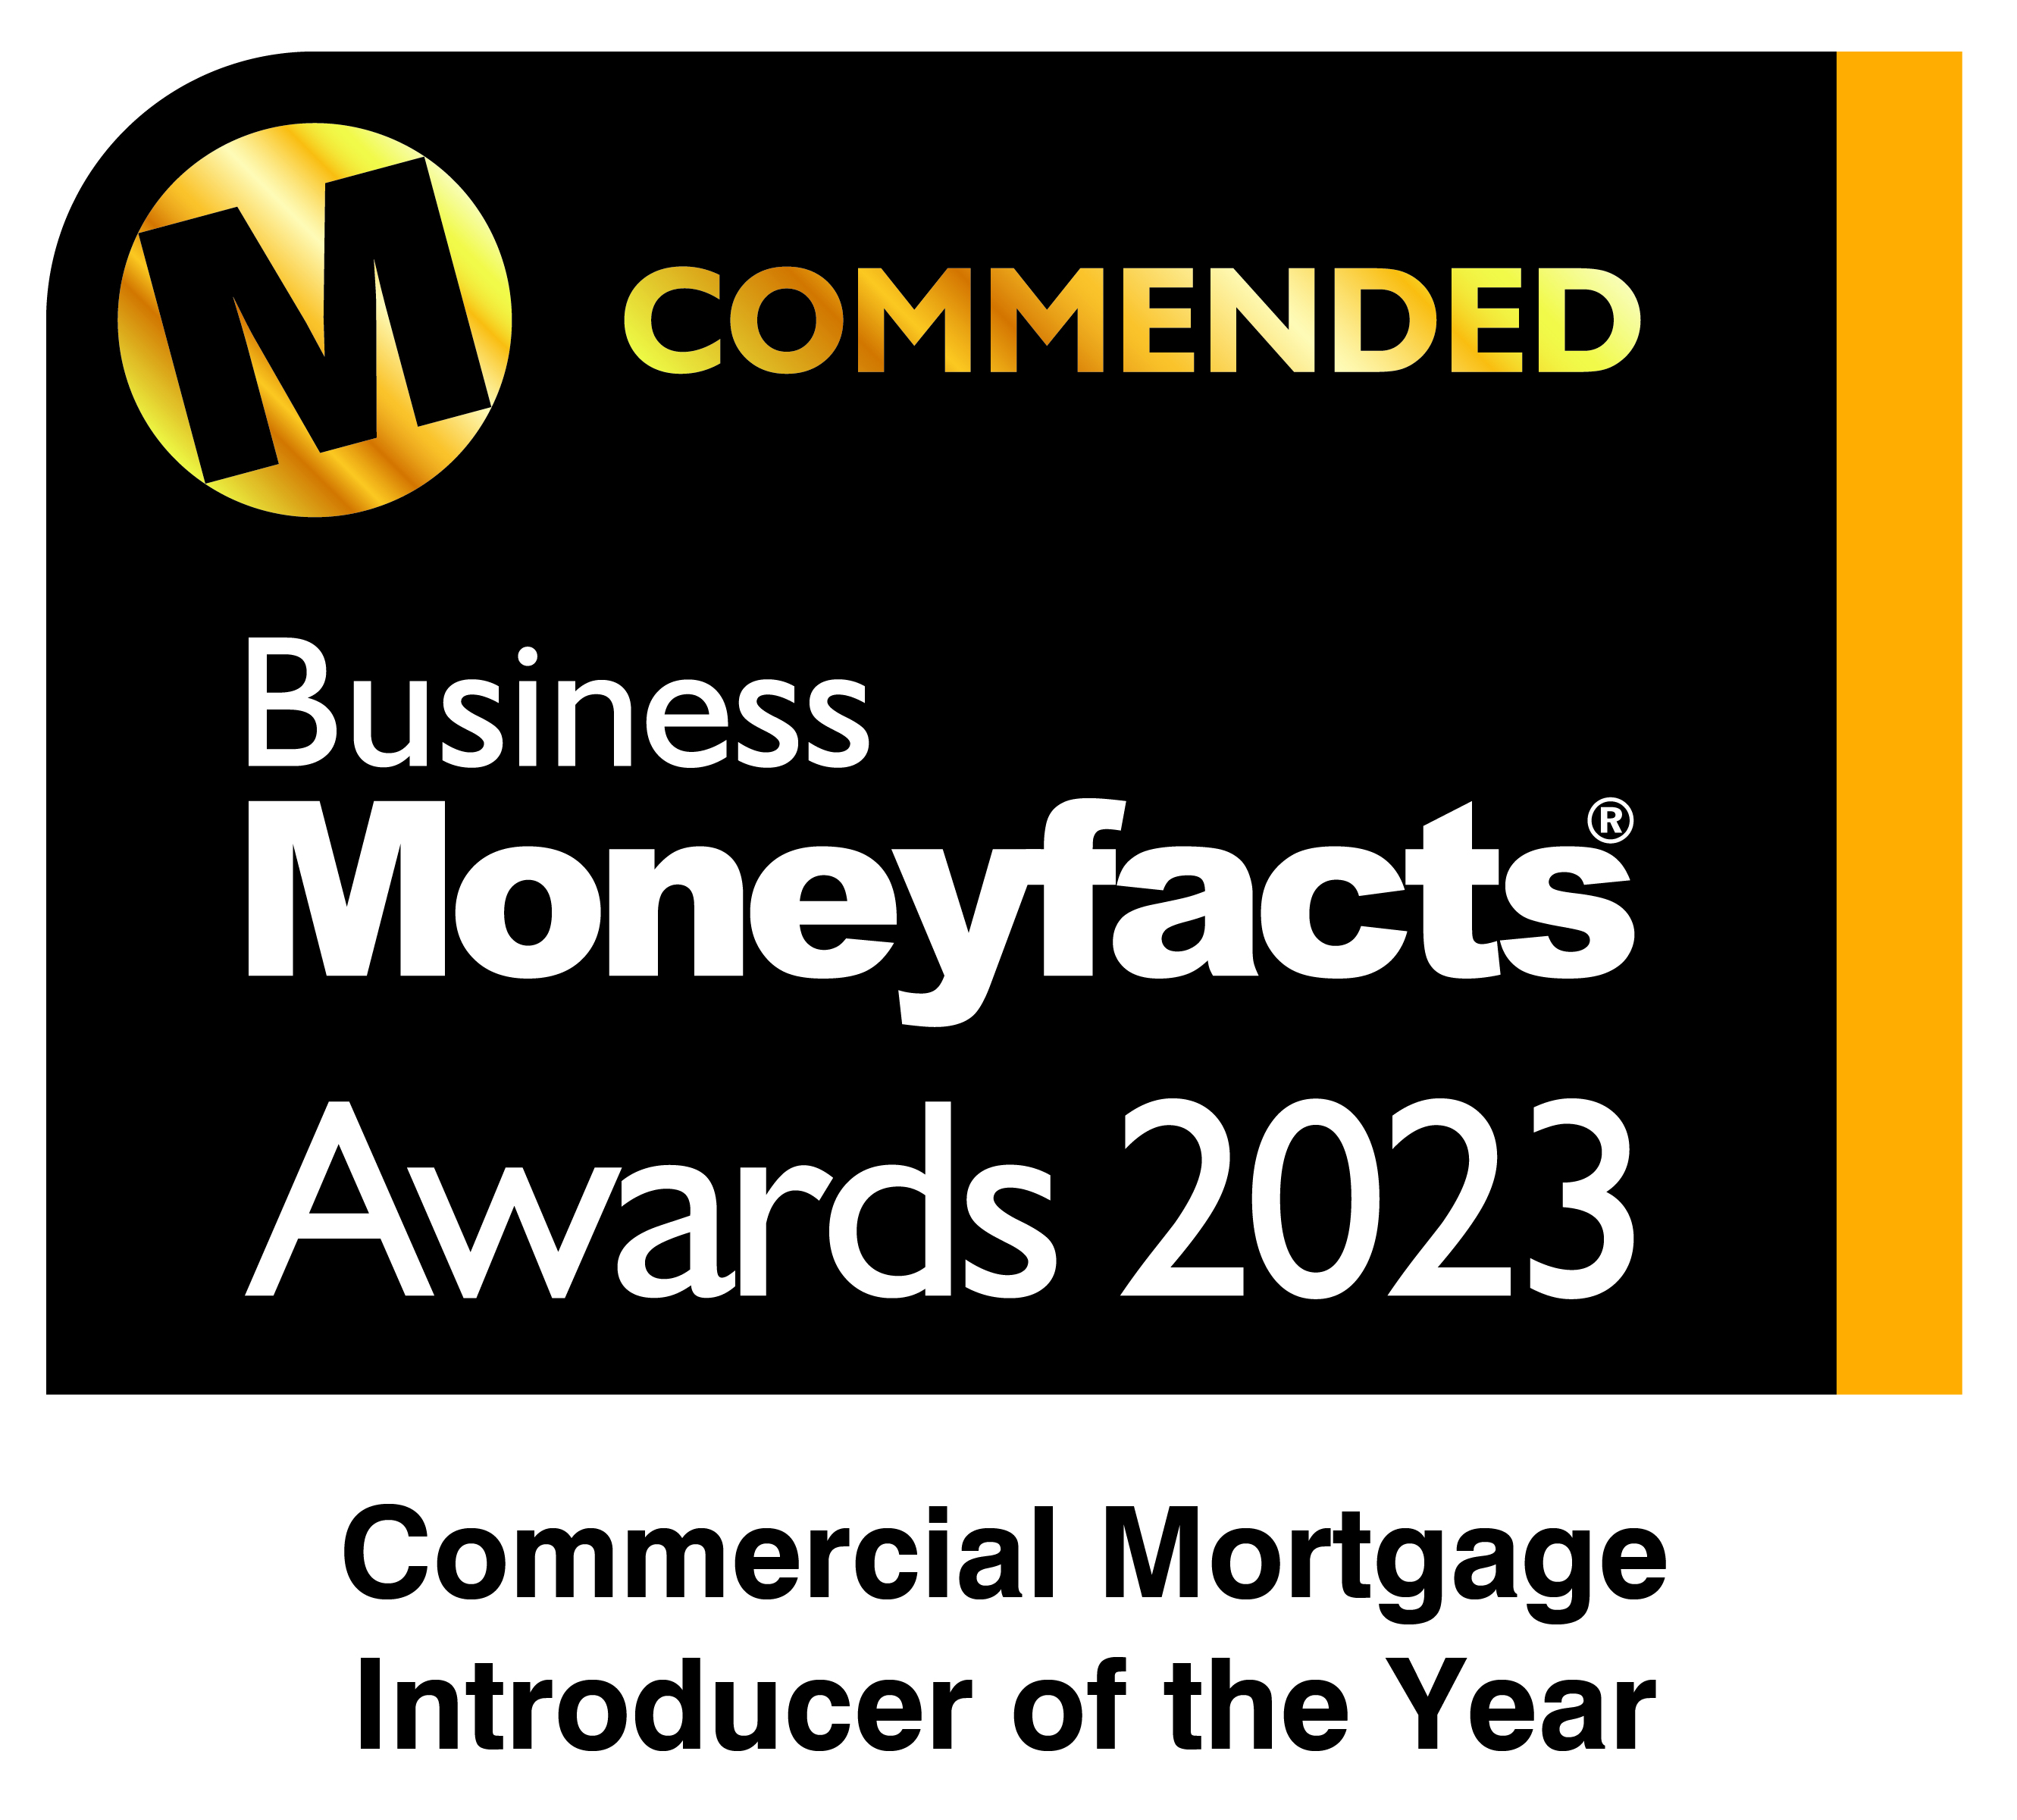 Business Moneyfacts Awards 2023 Commended